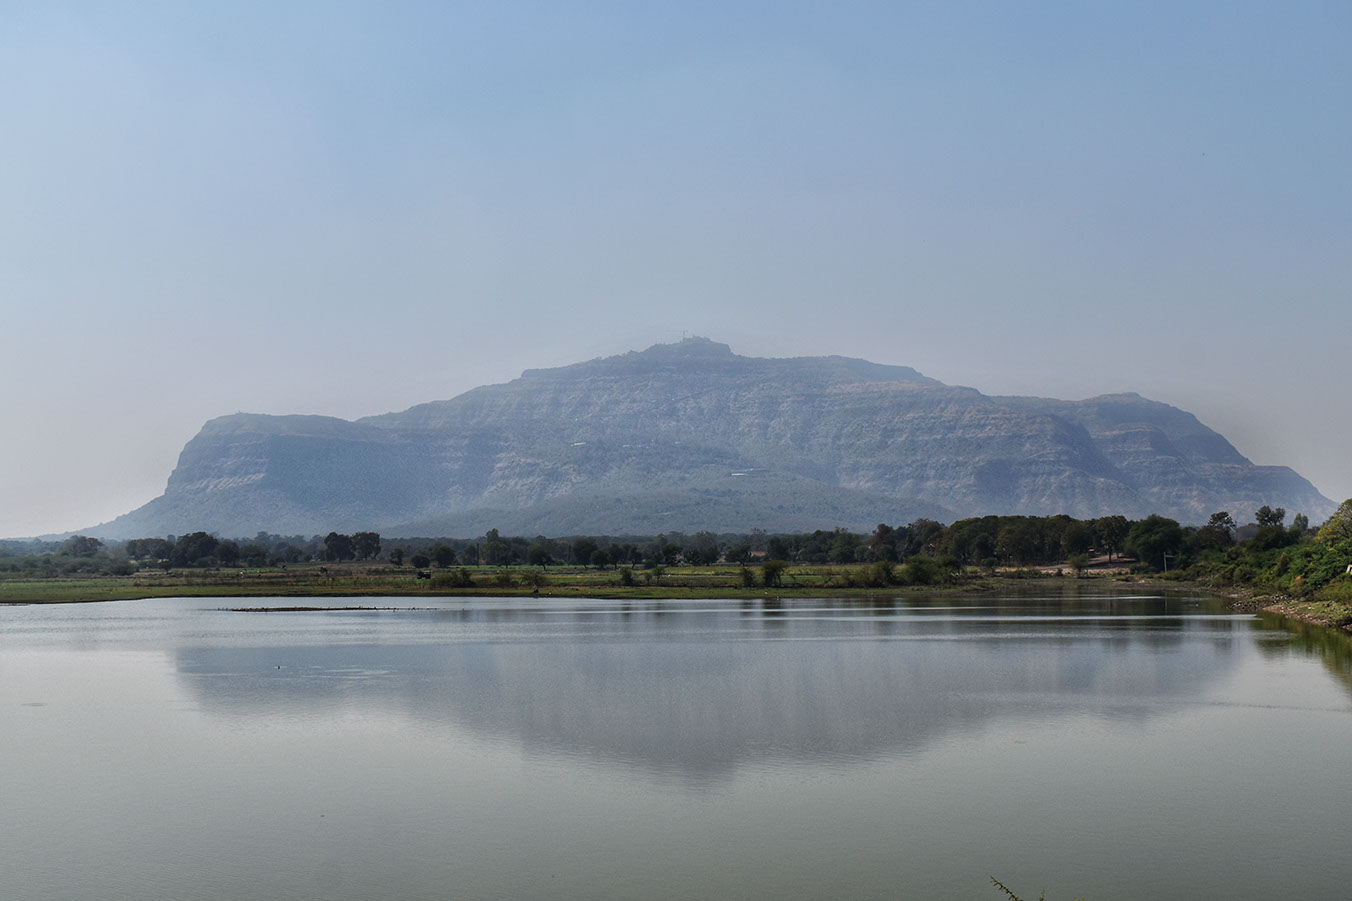 The tranquil surroundings of the Vadatalav lake with Pavagadh hills in the background